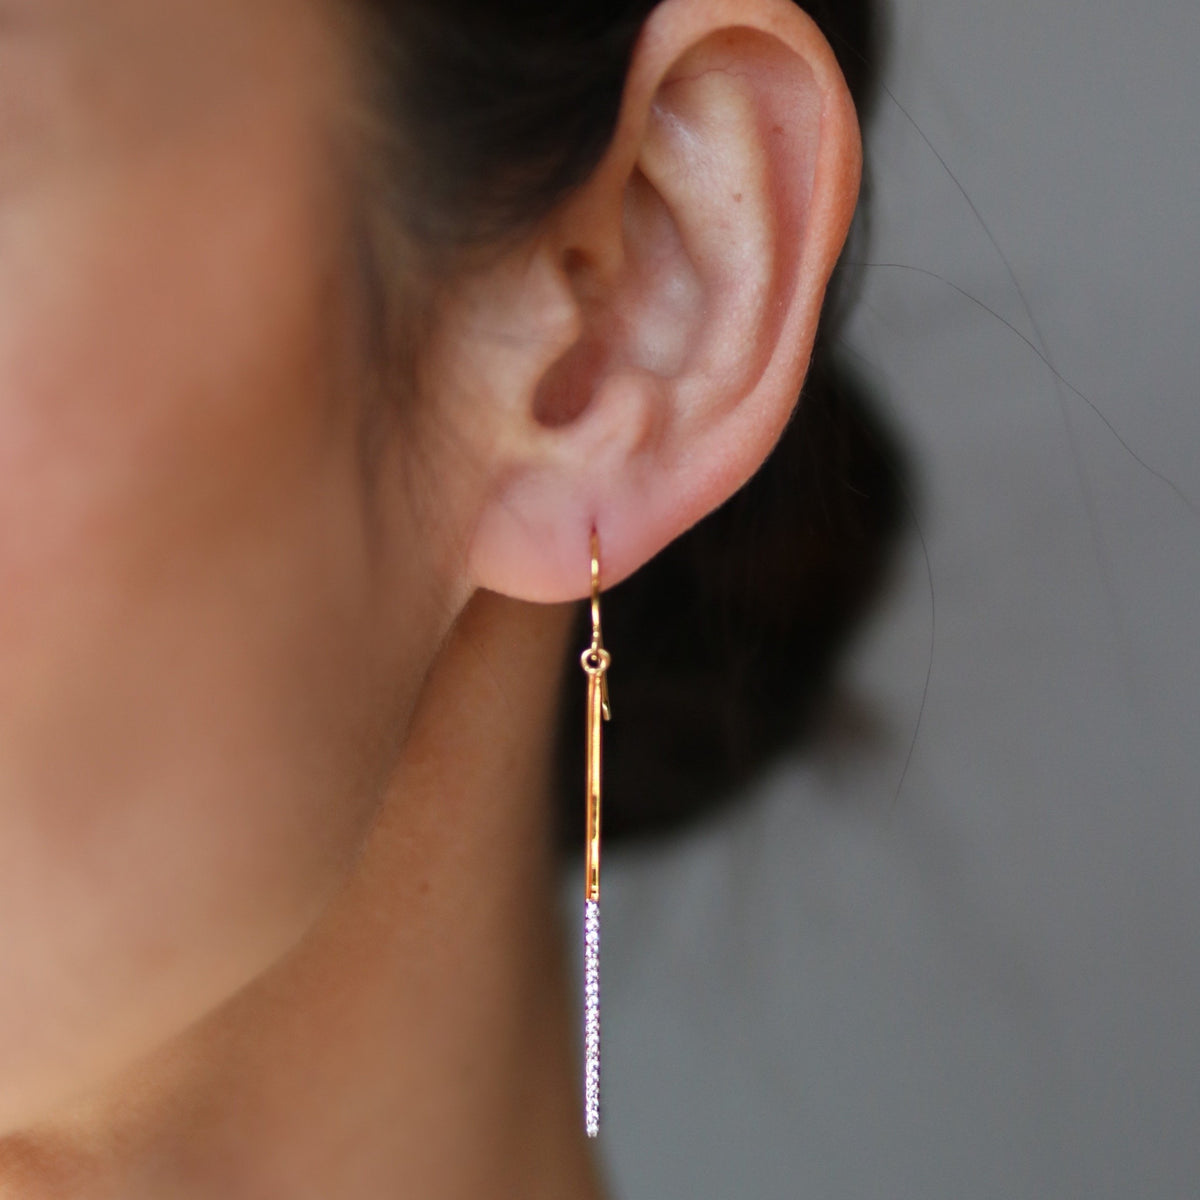 Pindrop Earrings | Gold